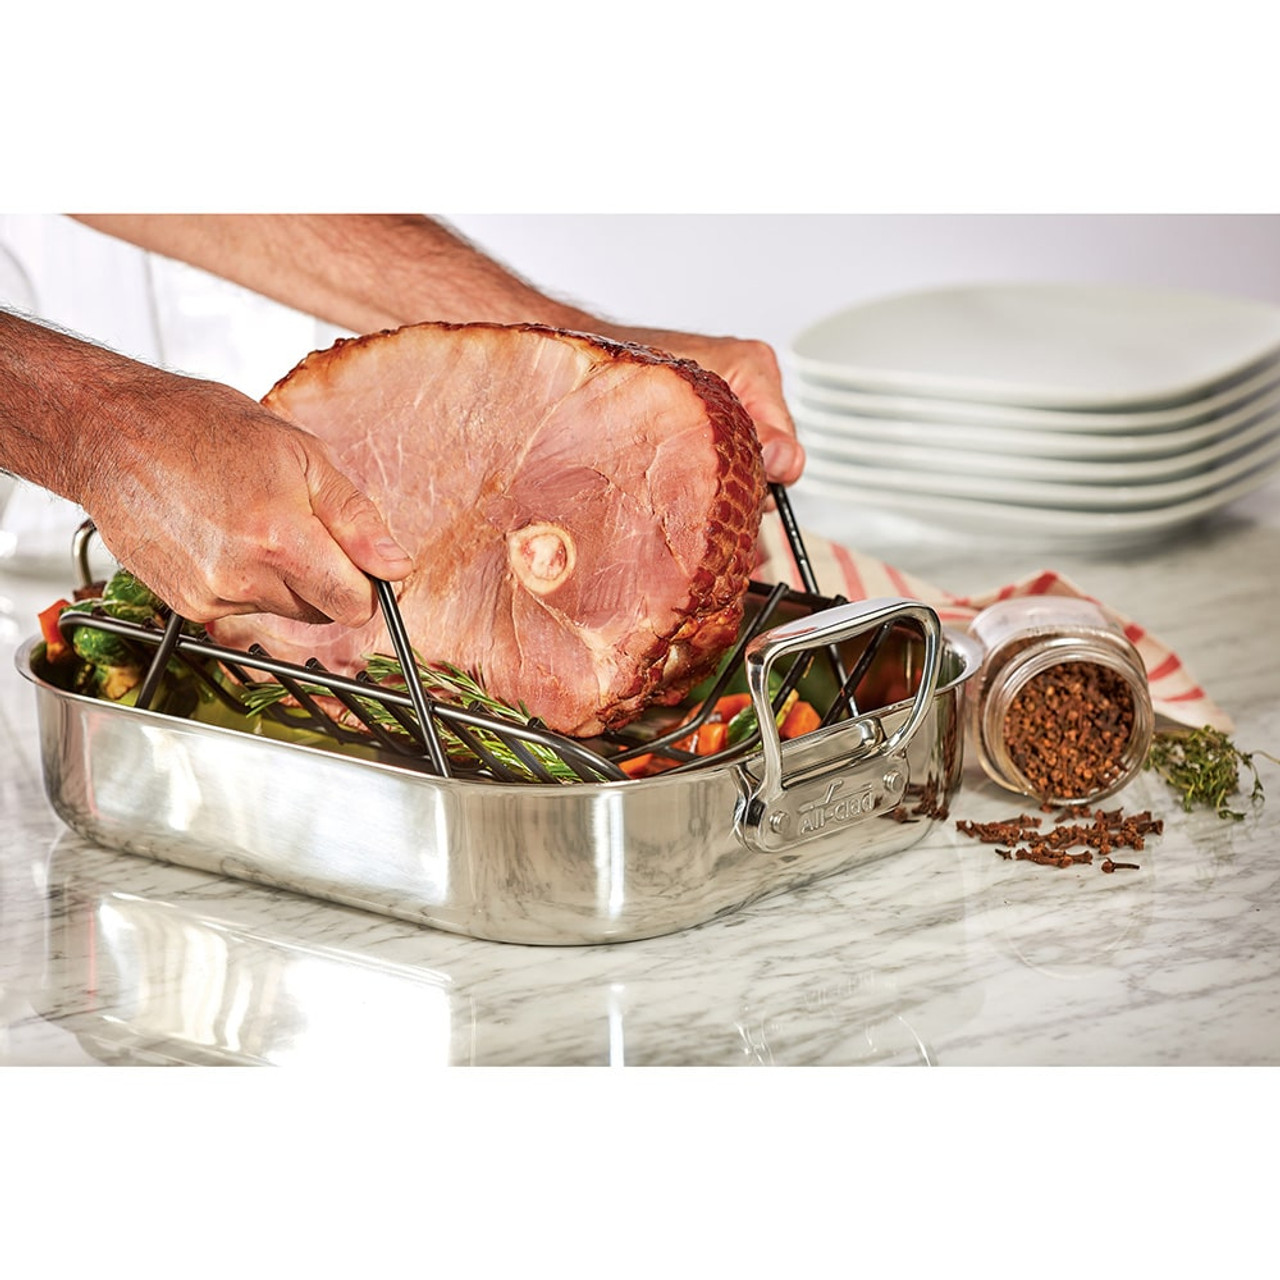 All-Clad Stainless Steel Roasting Pan with Rack, S